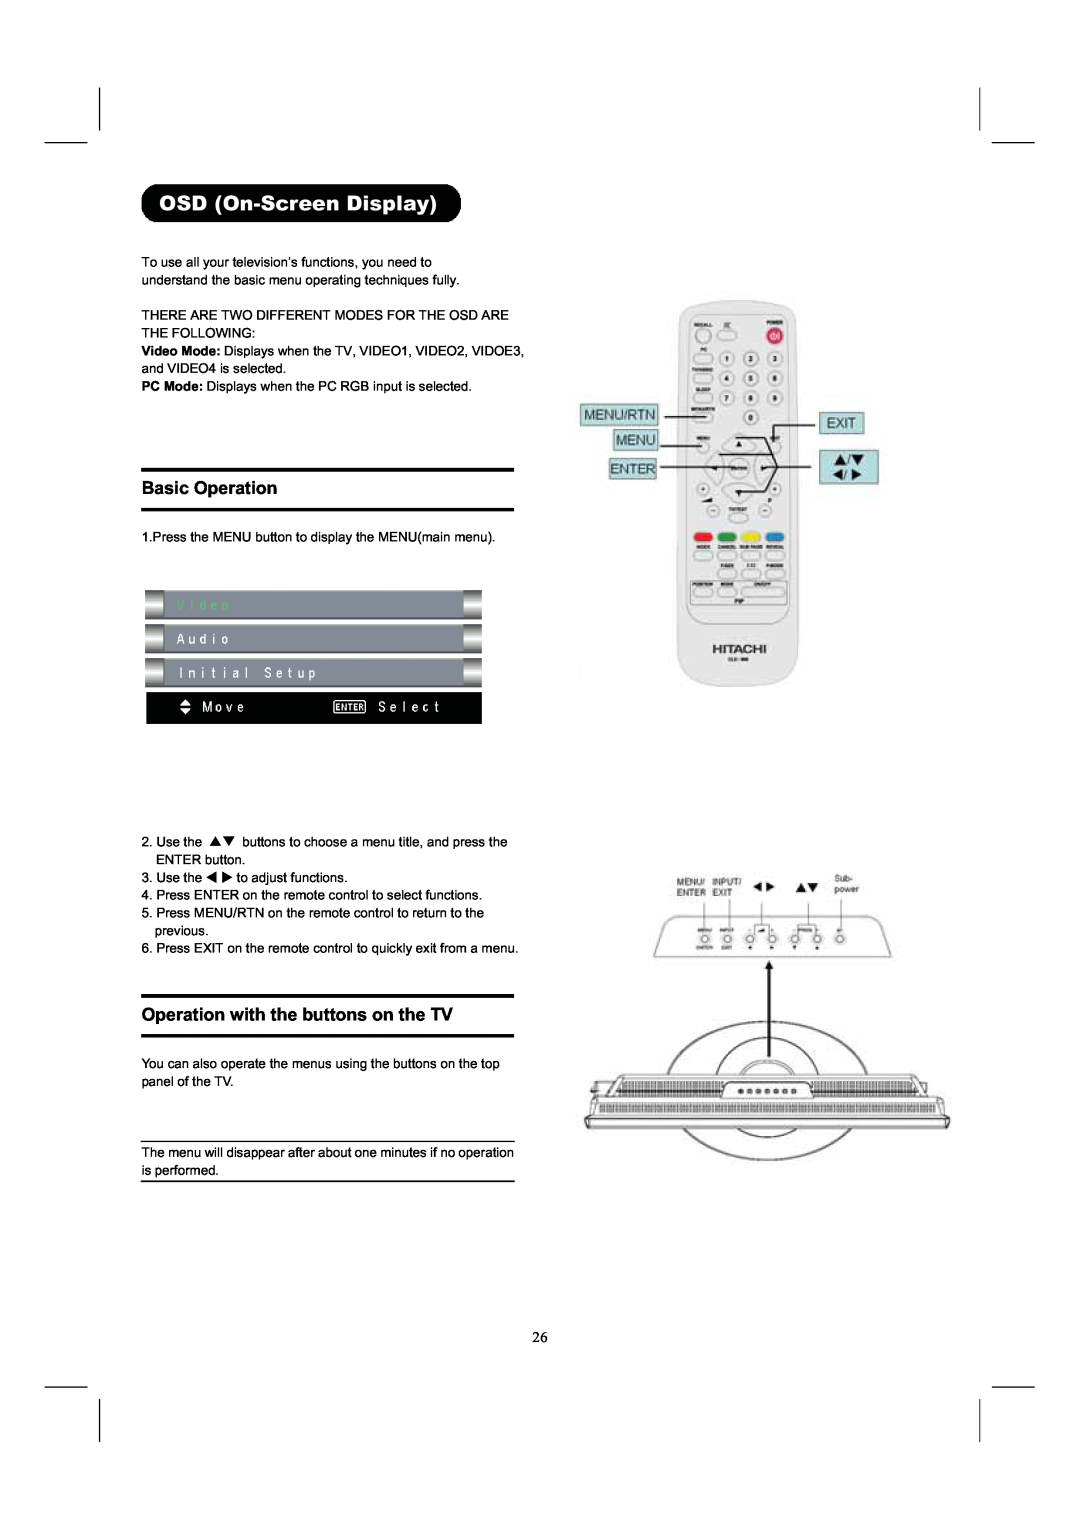 Hitachi 26LD8000TA user manual OSD On-Screen Display, Operation with the buttons on the TV, Basic Operation 